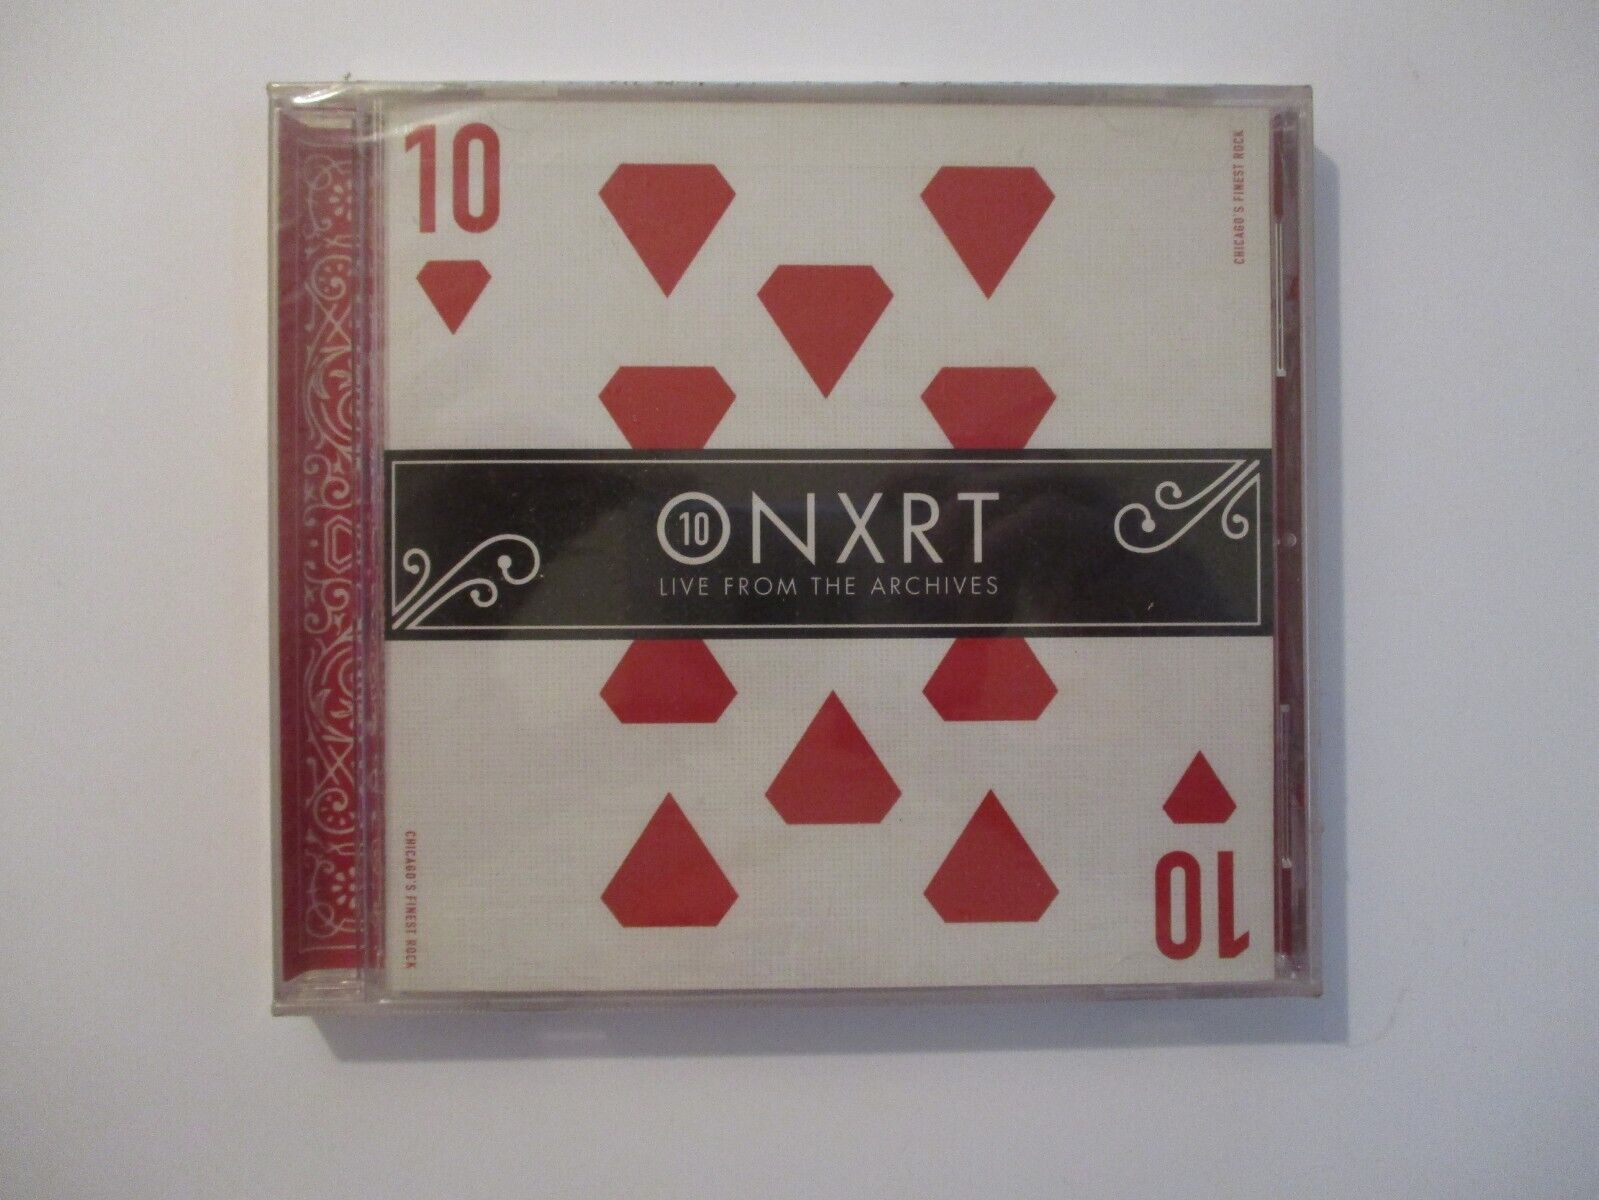 Onxrt: Live From The Archives Volume 10 - CD - Live - RARE  Factory Sealed